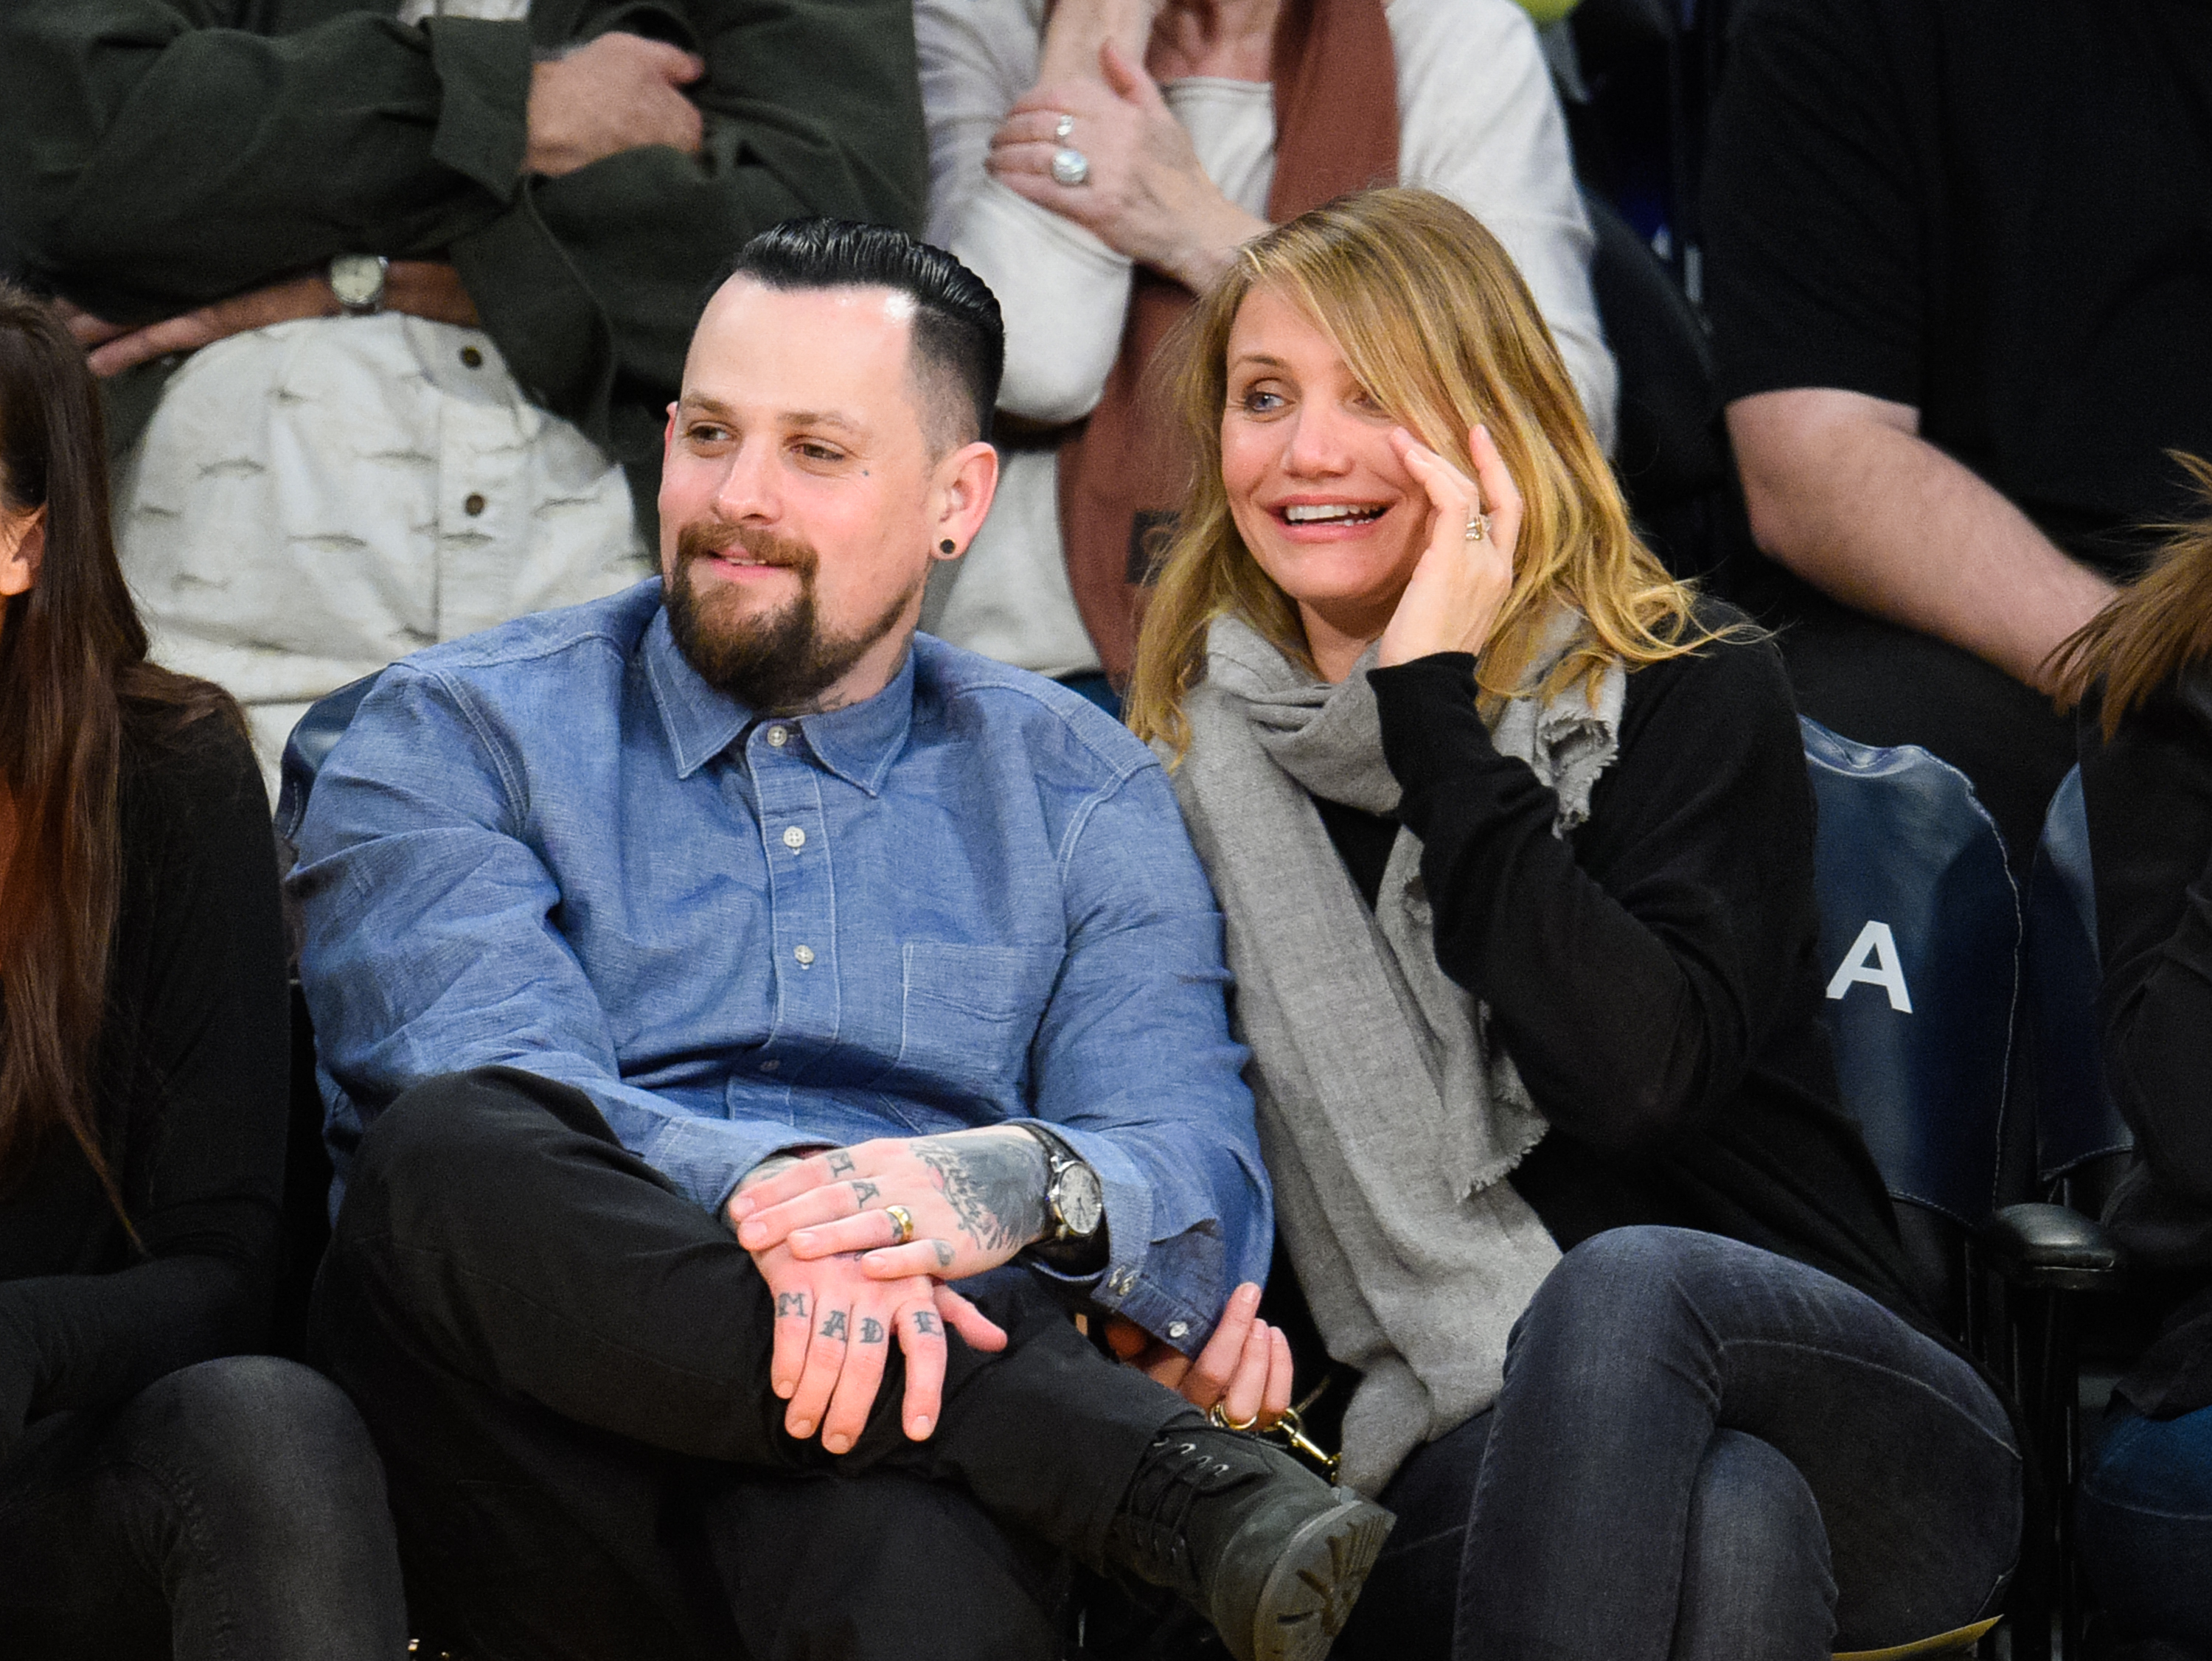 Benji Madden and Cameron Diaz at a basketball game between the Washington Wizards and the Los Angeles Lakers on January 27, 2015 in Los Angeles, California | Source: Getty Images